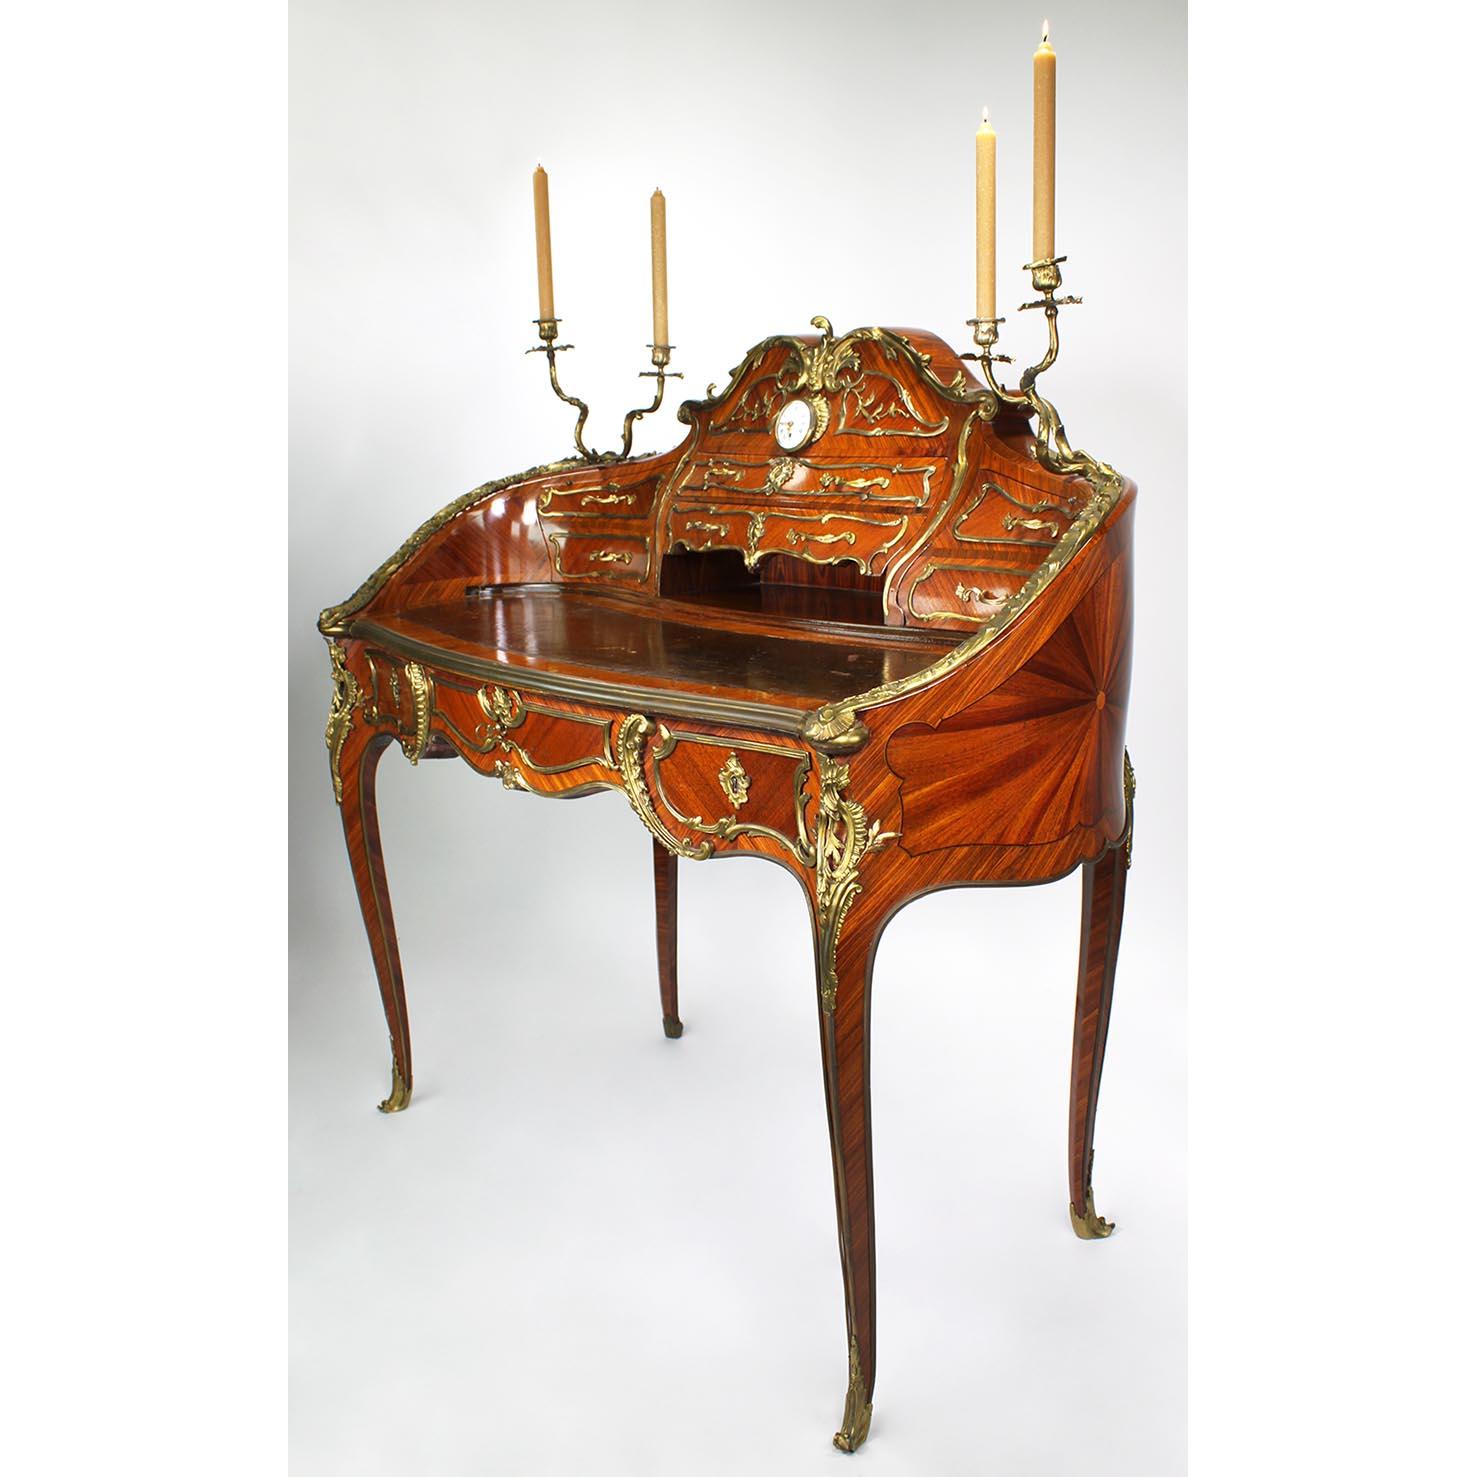 A Very fine French 19th century Louis XV Style Ormolu-Mounted Kingwood, Satinwood and Fruitwood Parquetry Kidney-Shaped secrétaire de dame (Lady's Desk) with an enamel dial clock and Candelabra, Attributed to Théodore Millet 